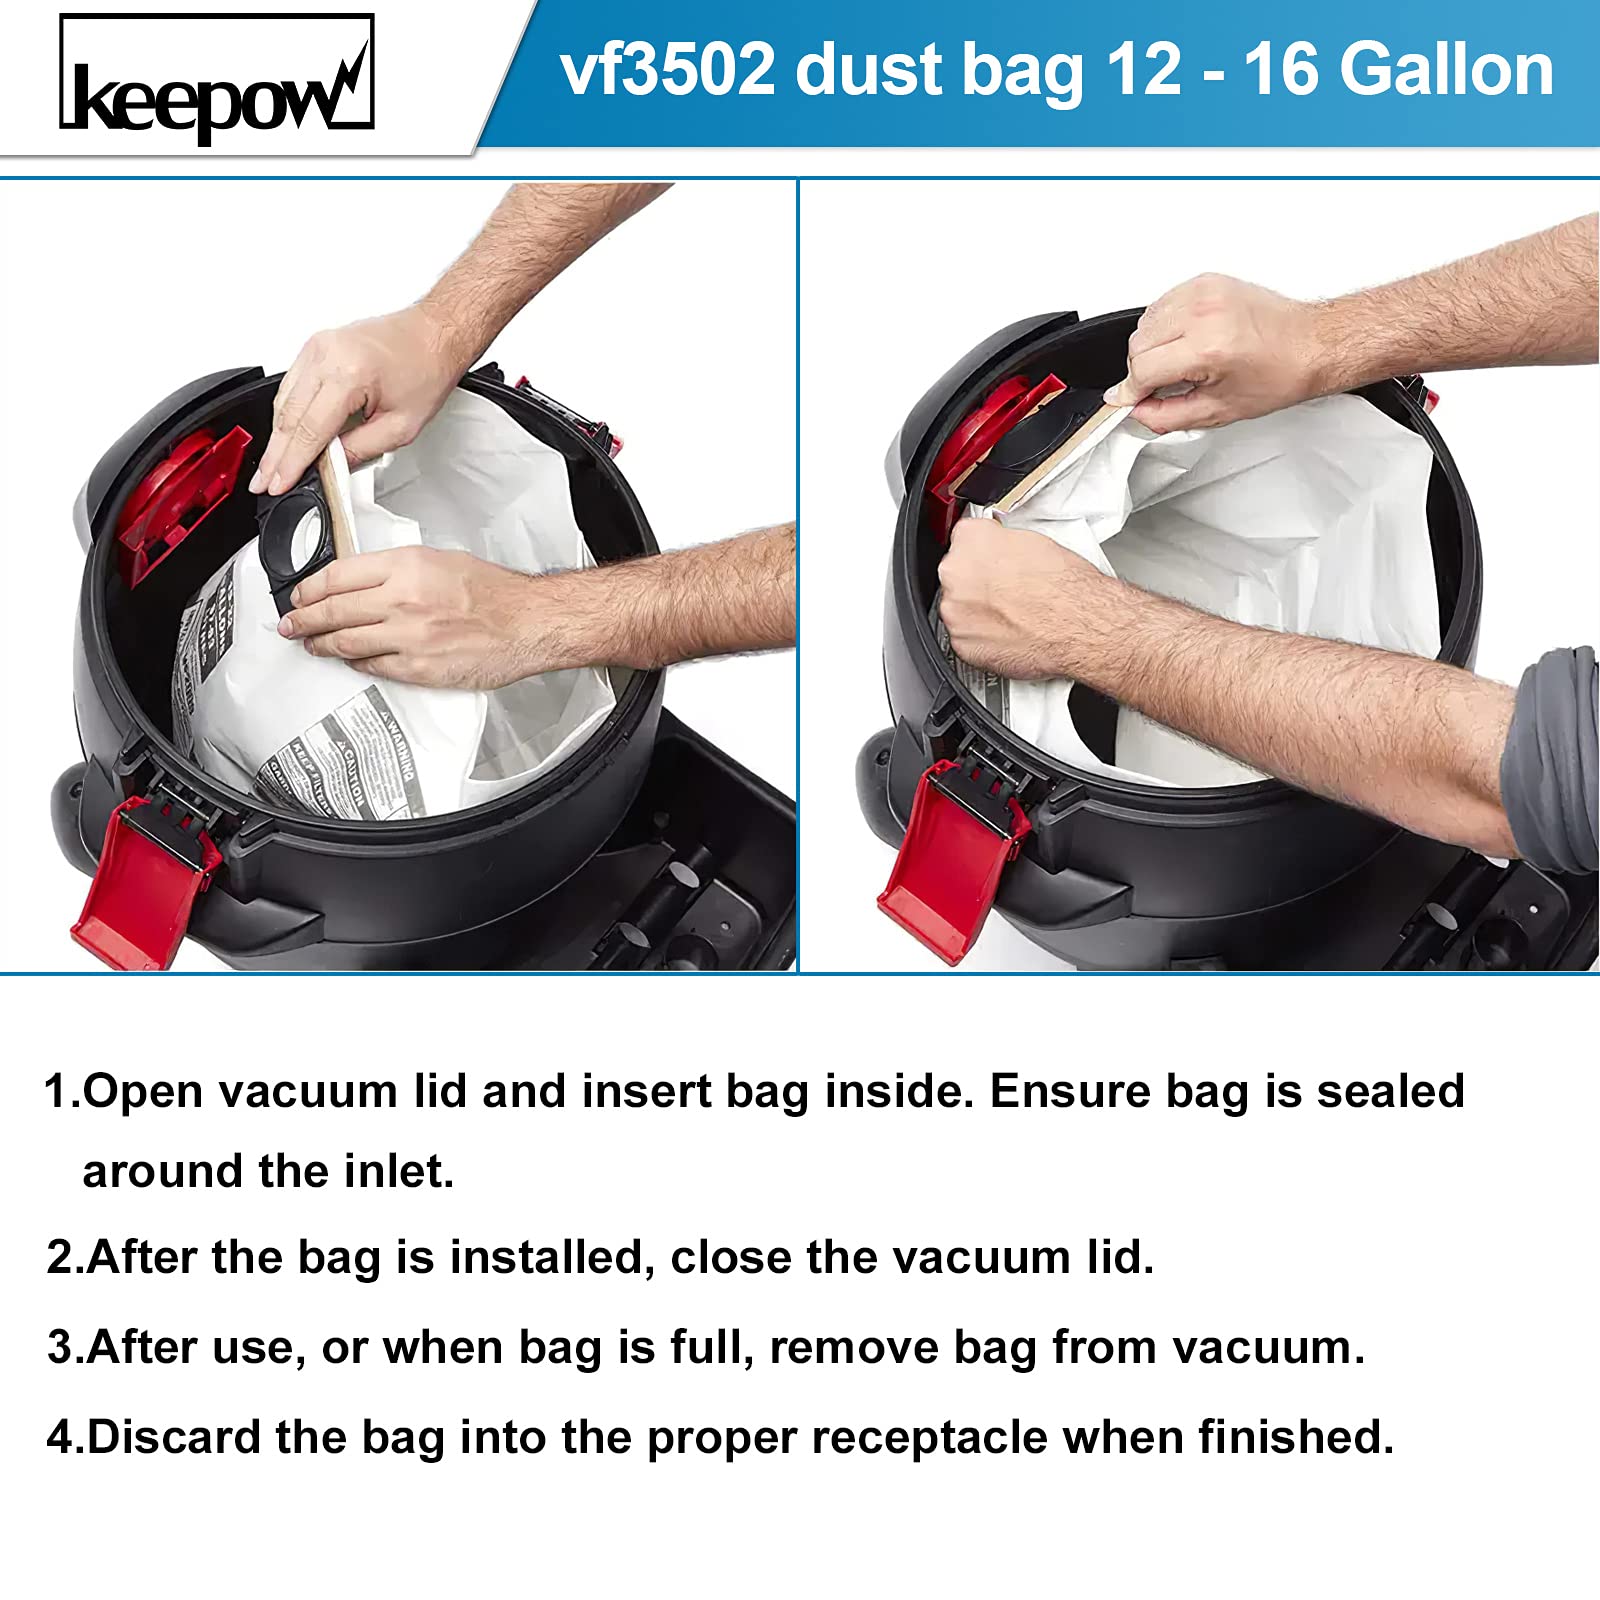 iKEEPOW VF3502 Shop Vac Bags Compatible with Ridgid Wet Dry Vacuum, 12-16 Gallon Bags, Replacement Fiter Bags Accessions, 23743 VF3502 High Efficiency Dust Bags (9 Pack)